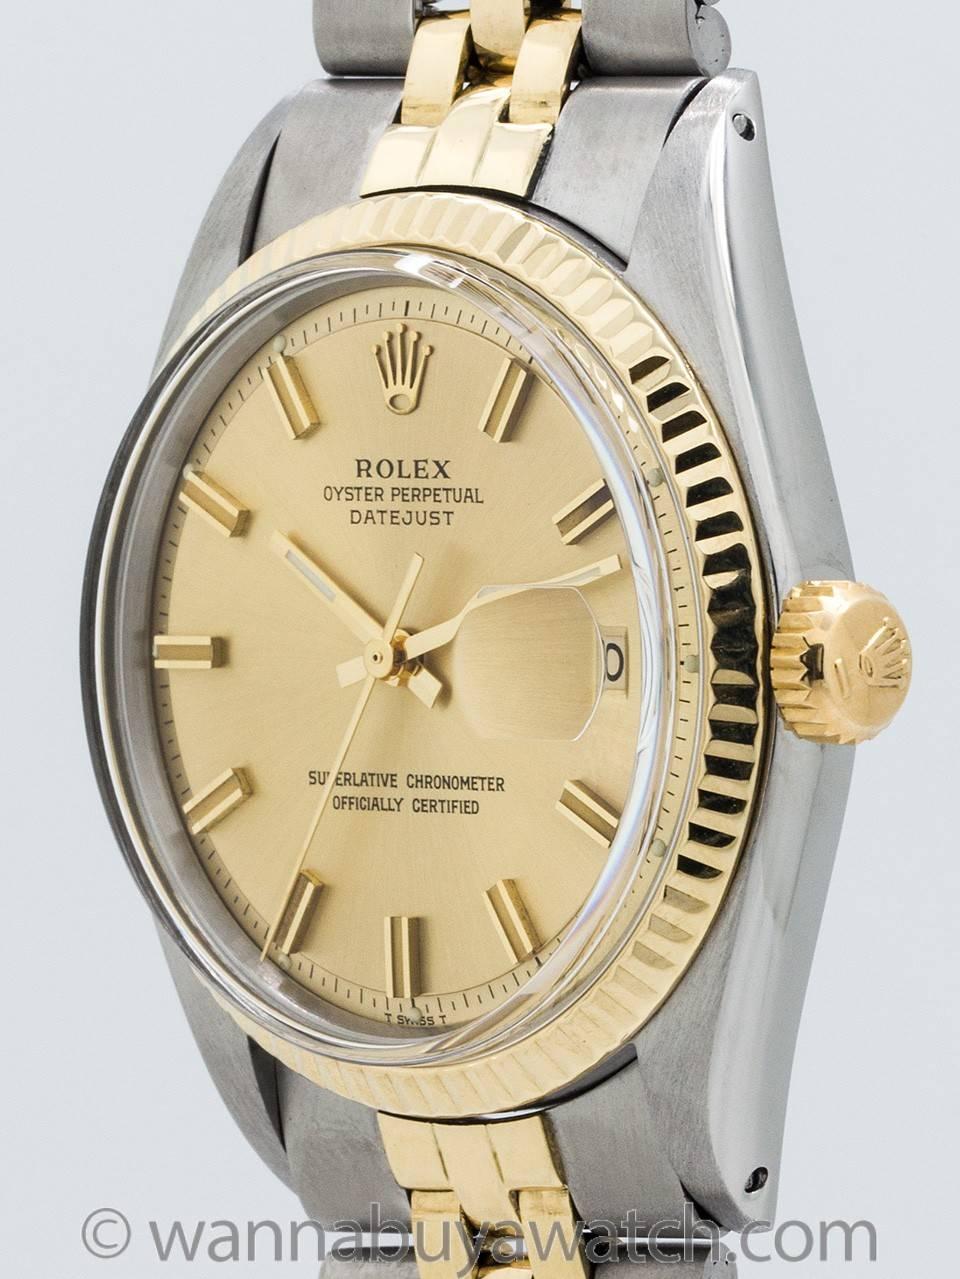 Modern Rolex Yellow Gold Stainless Steel Datejust Automatic Wristwatch Ref 1603 1970s